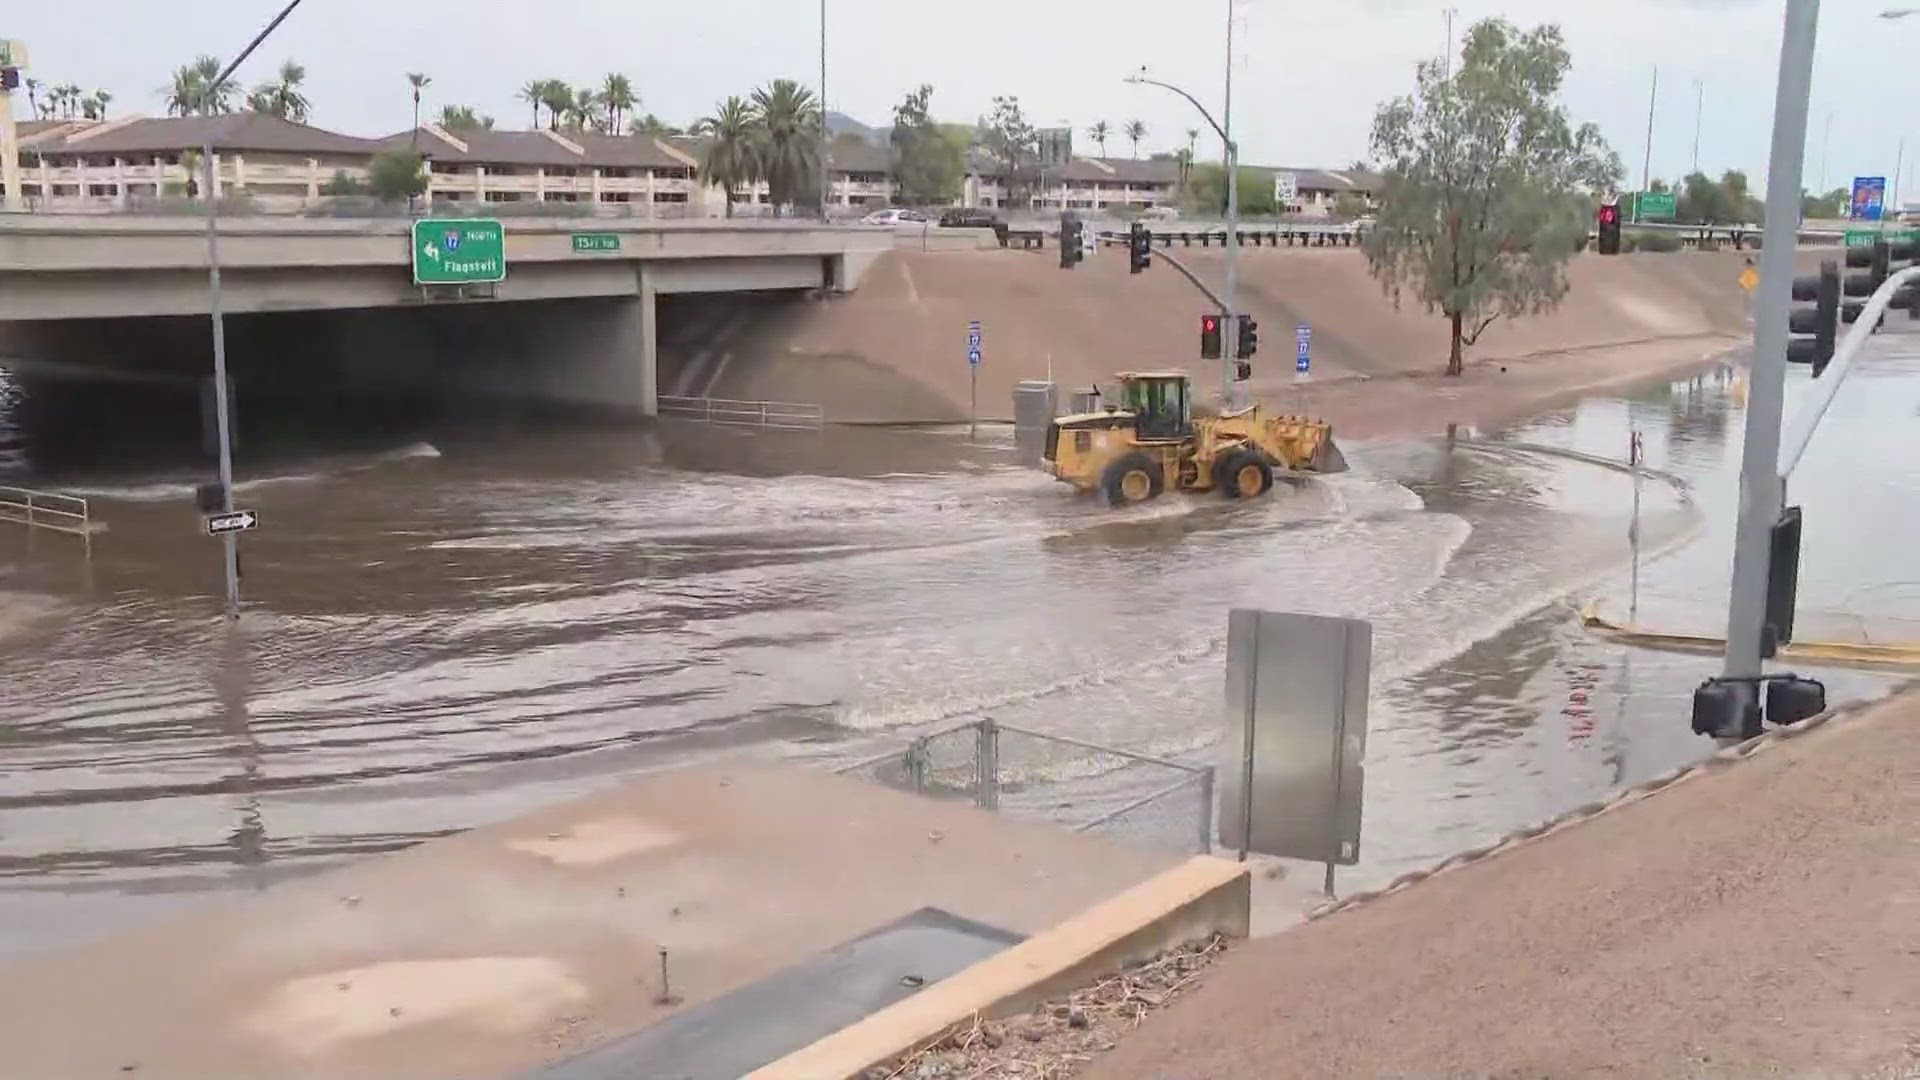 ADOT has installed a new drainage system along 1-17 designed to reduce the risk of flooding during Arizona's monsoon season.